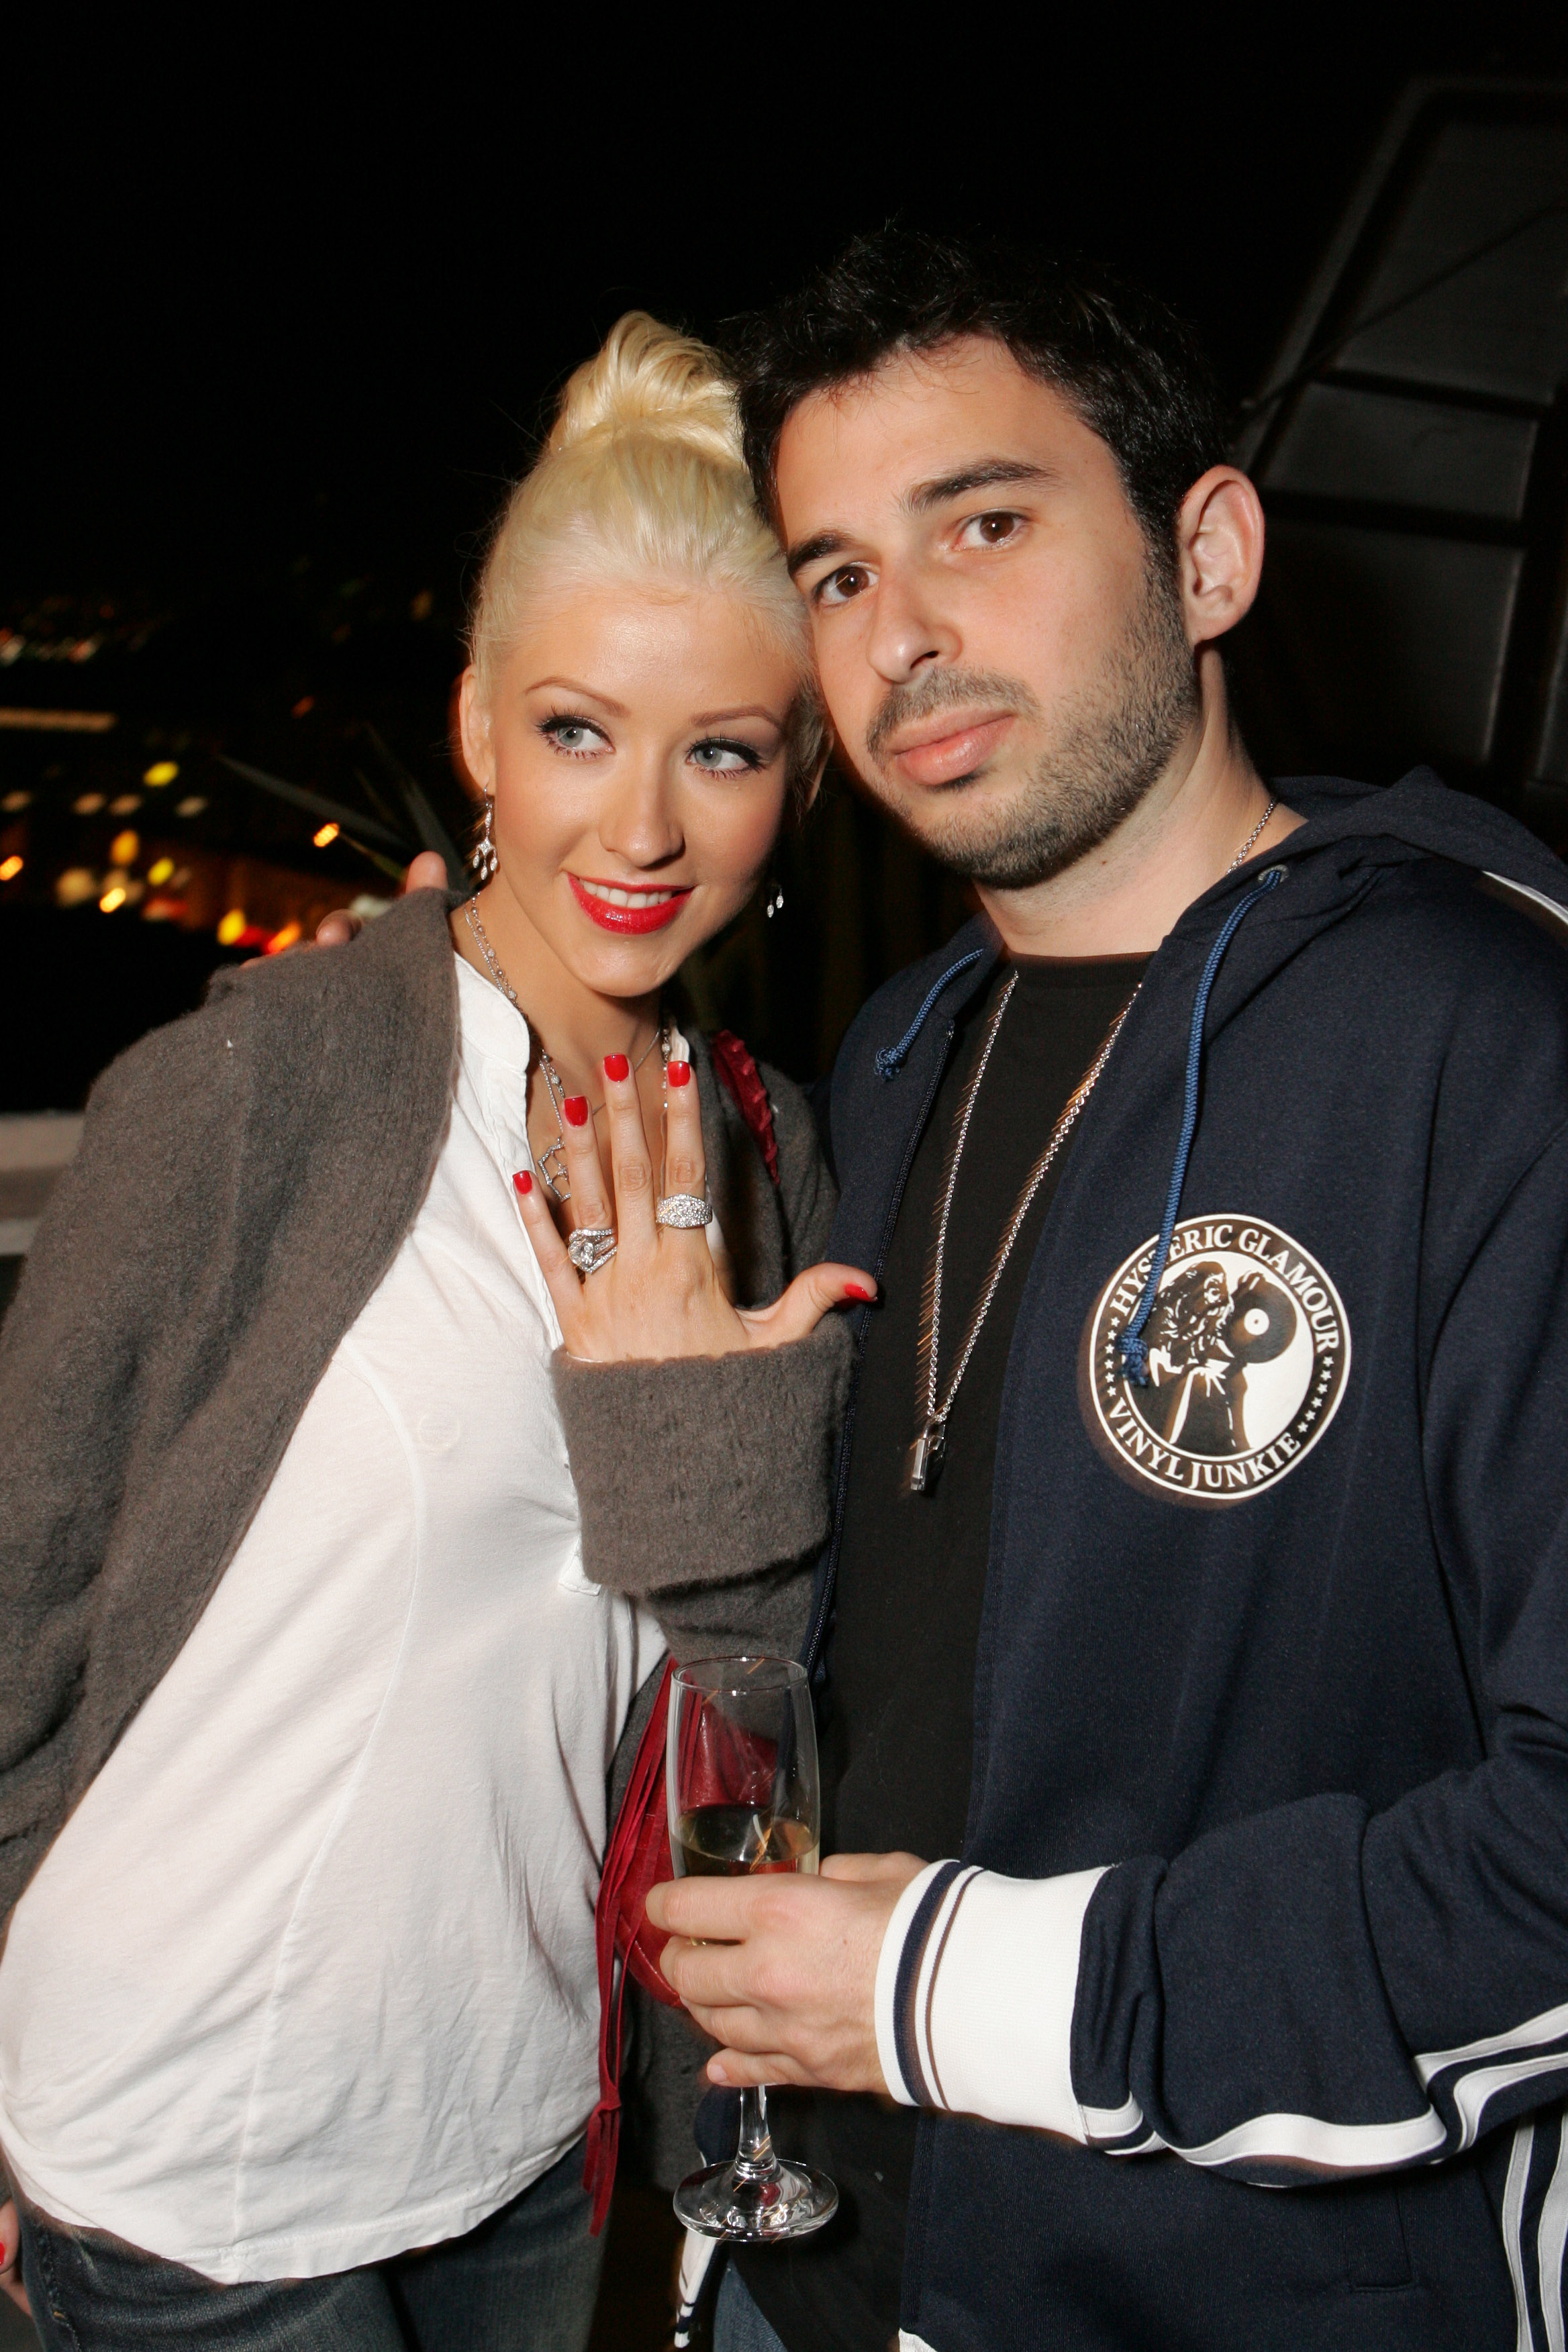 Christina Aguilera and Jordan Bratman during the US Launch of Stephen Webster's "Femme Fatale" Diamond Collection on December 9, 2005 in Hollywood, California. | Source: Getty Images